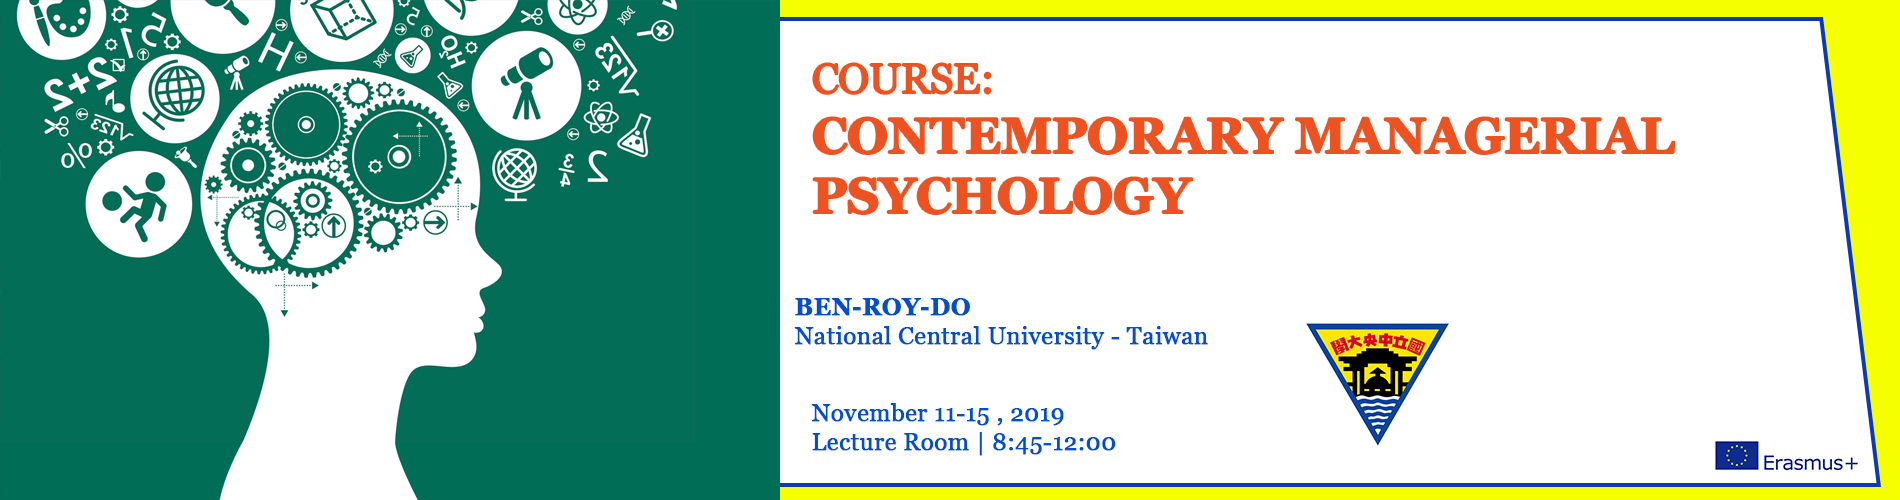 11.11 - Contemporary Managerial Psychology